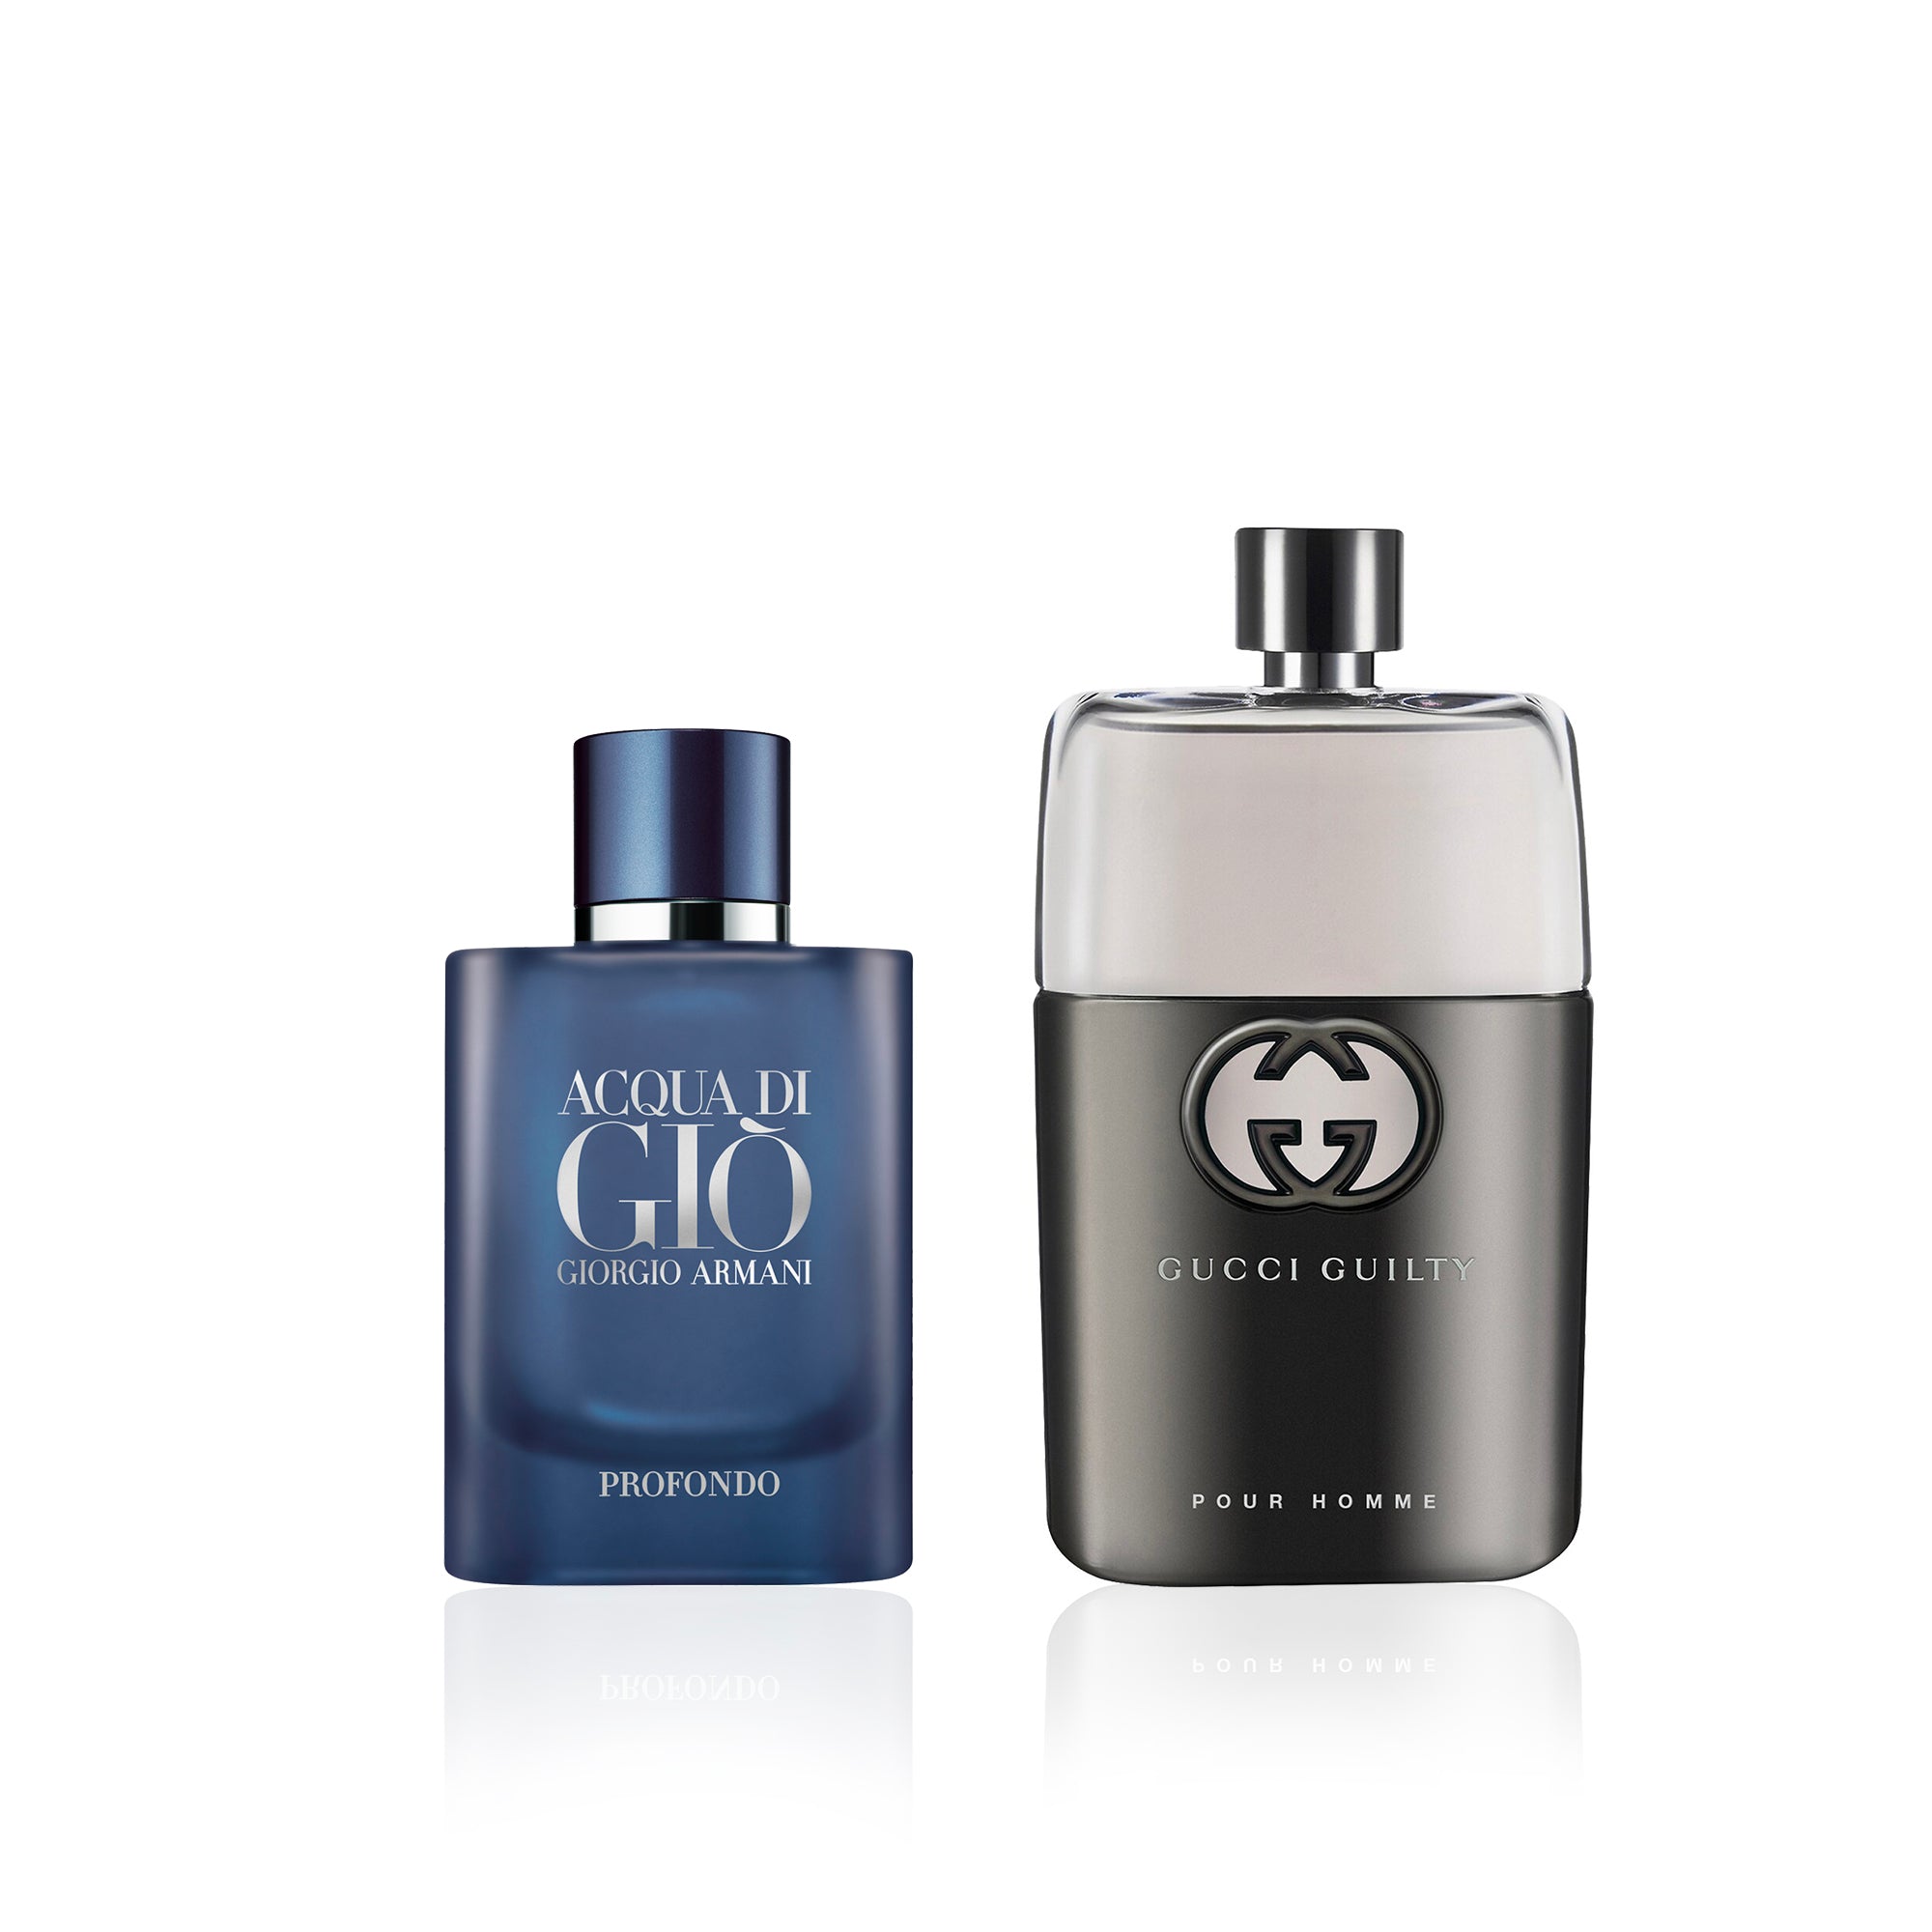 Bundle Deal His & Hers: Light Blue by Dolce & Gabbana for Men and